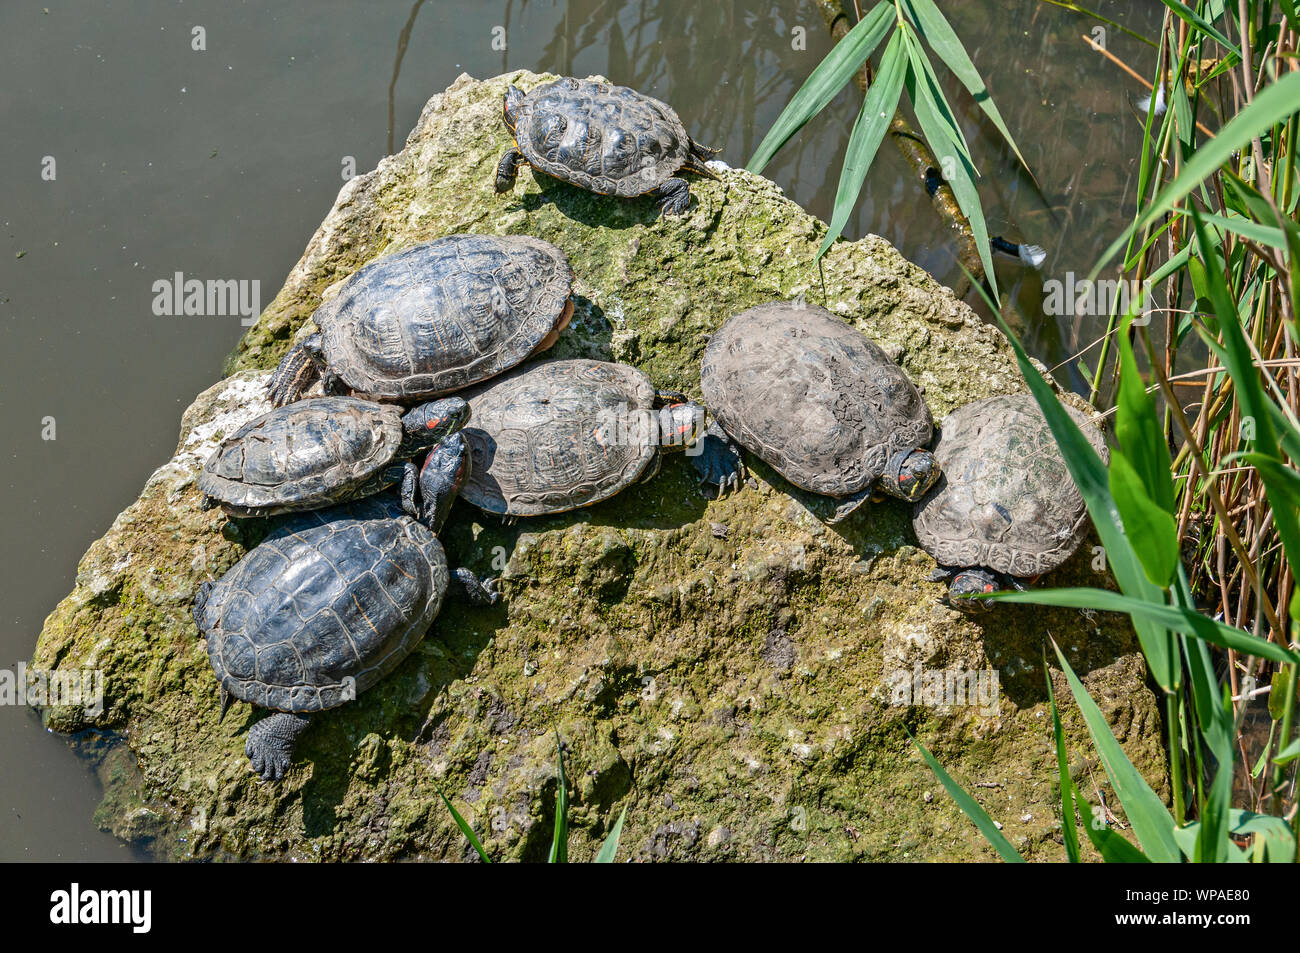 Seven red-eared terrapins stretch out to expose their heads, legs, feet and tails showing their red and yellow markings as they sunbathe on a rock Stock Photo